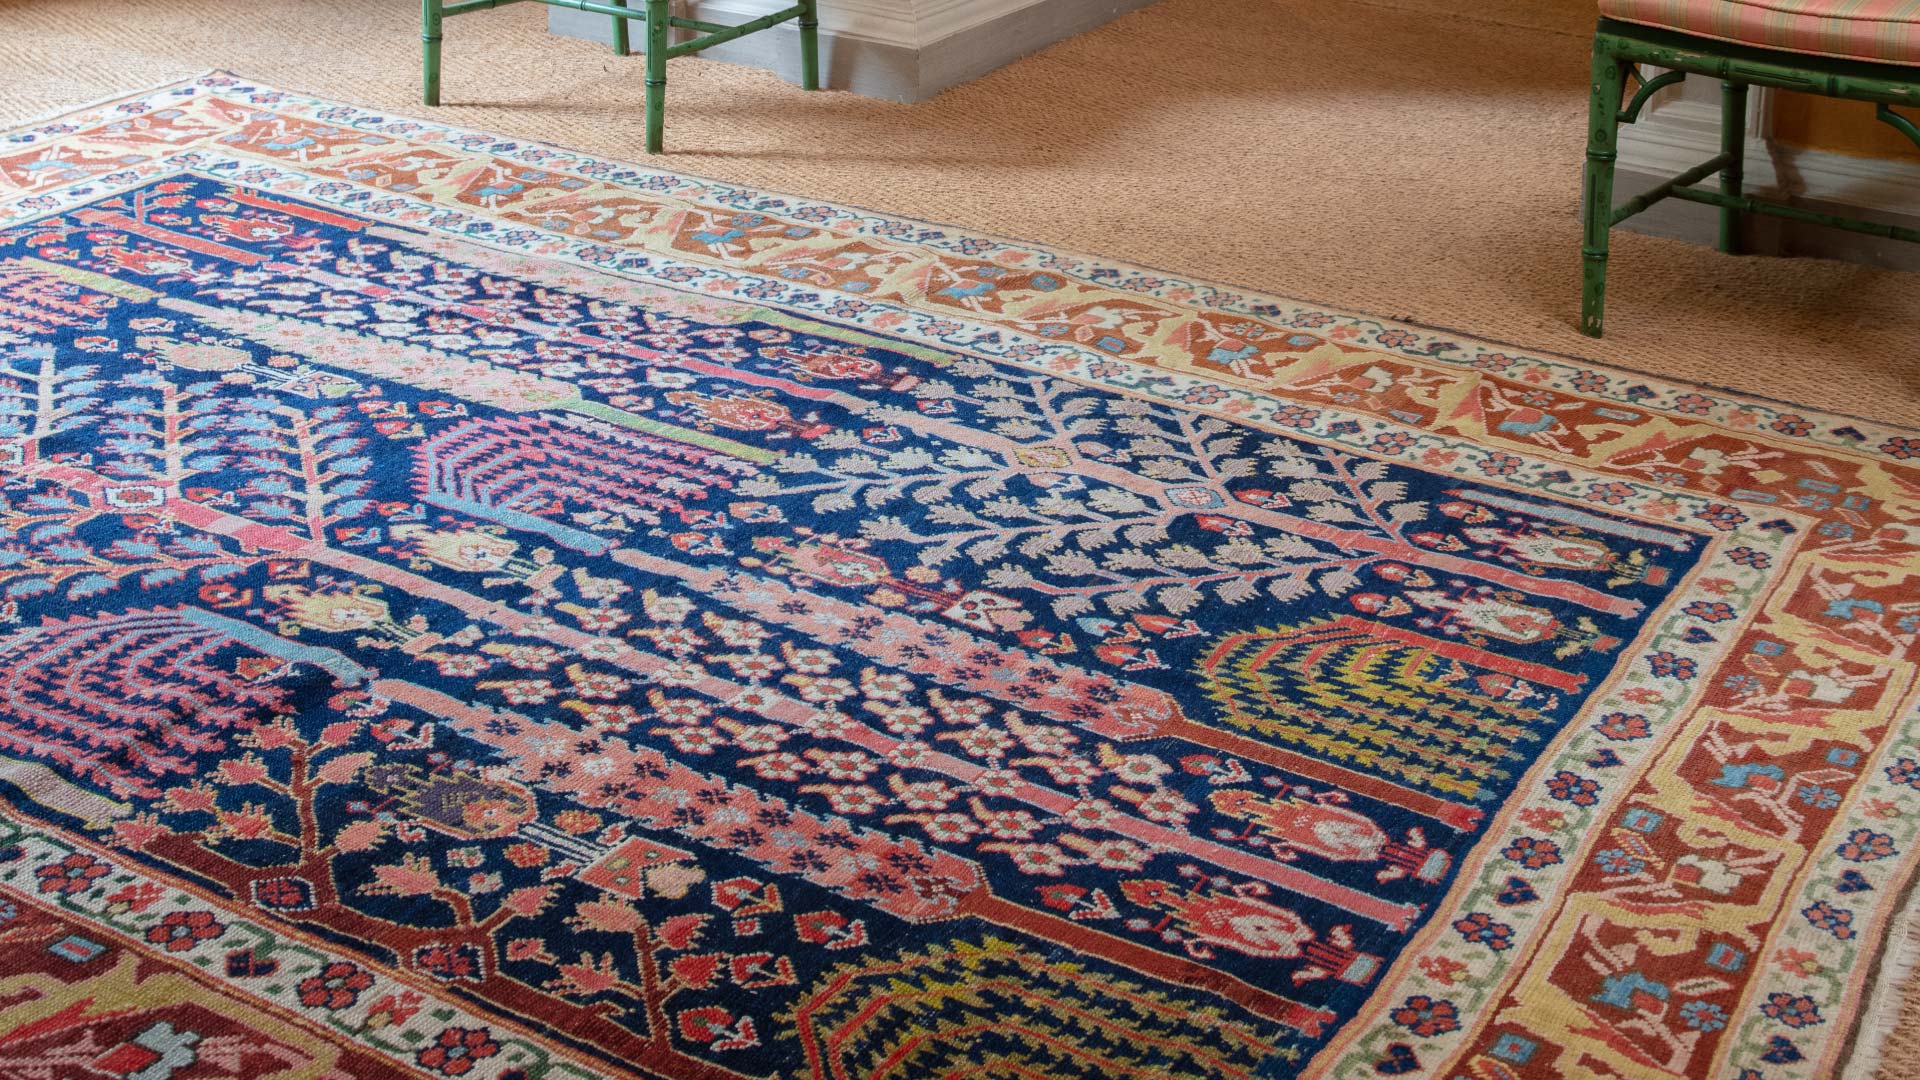 Let our experts hand pick a variety of rugs for you